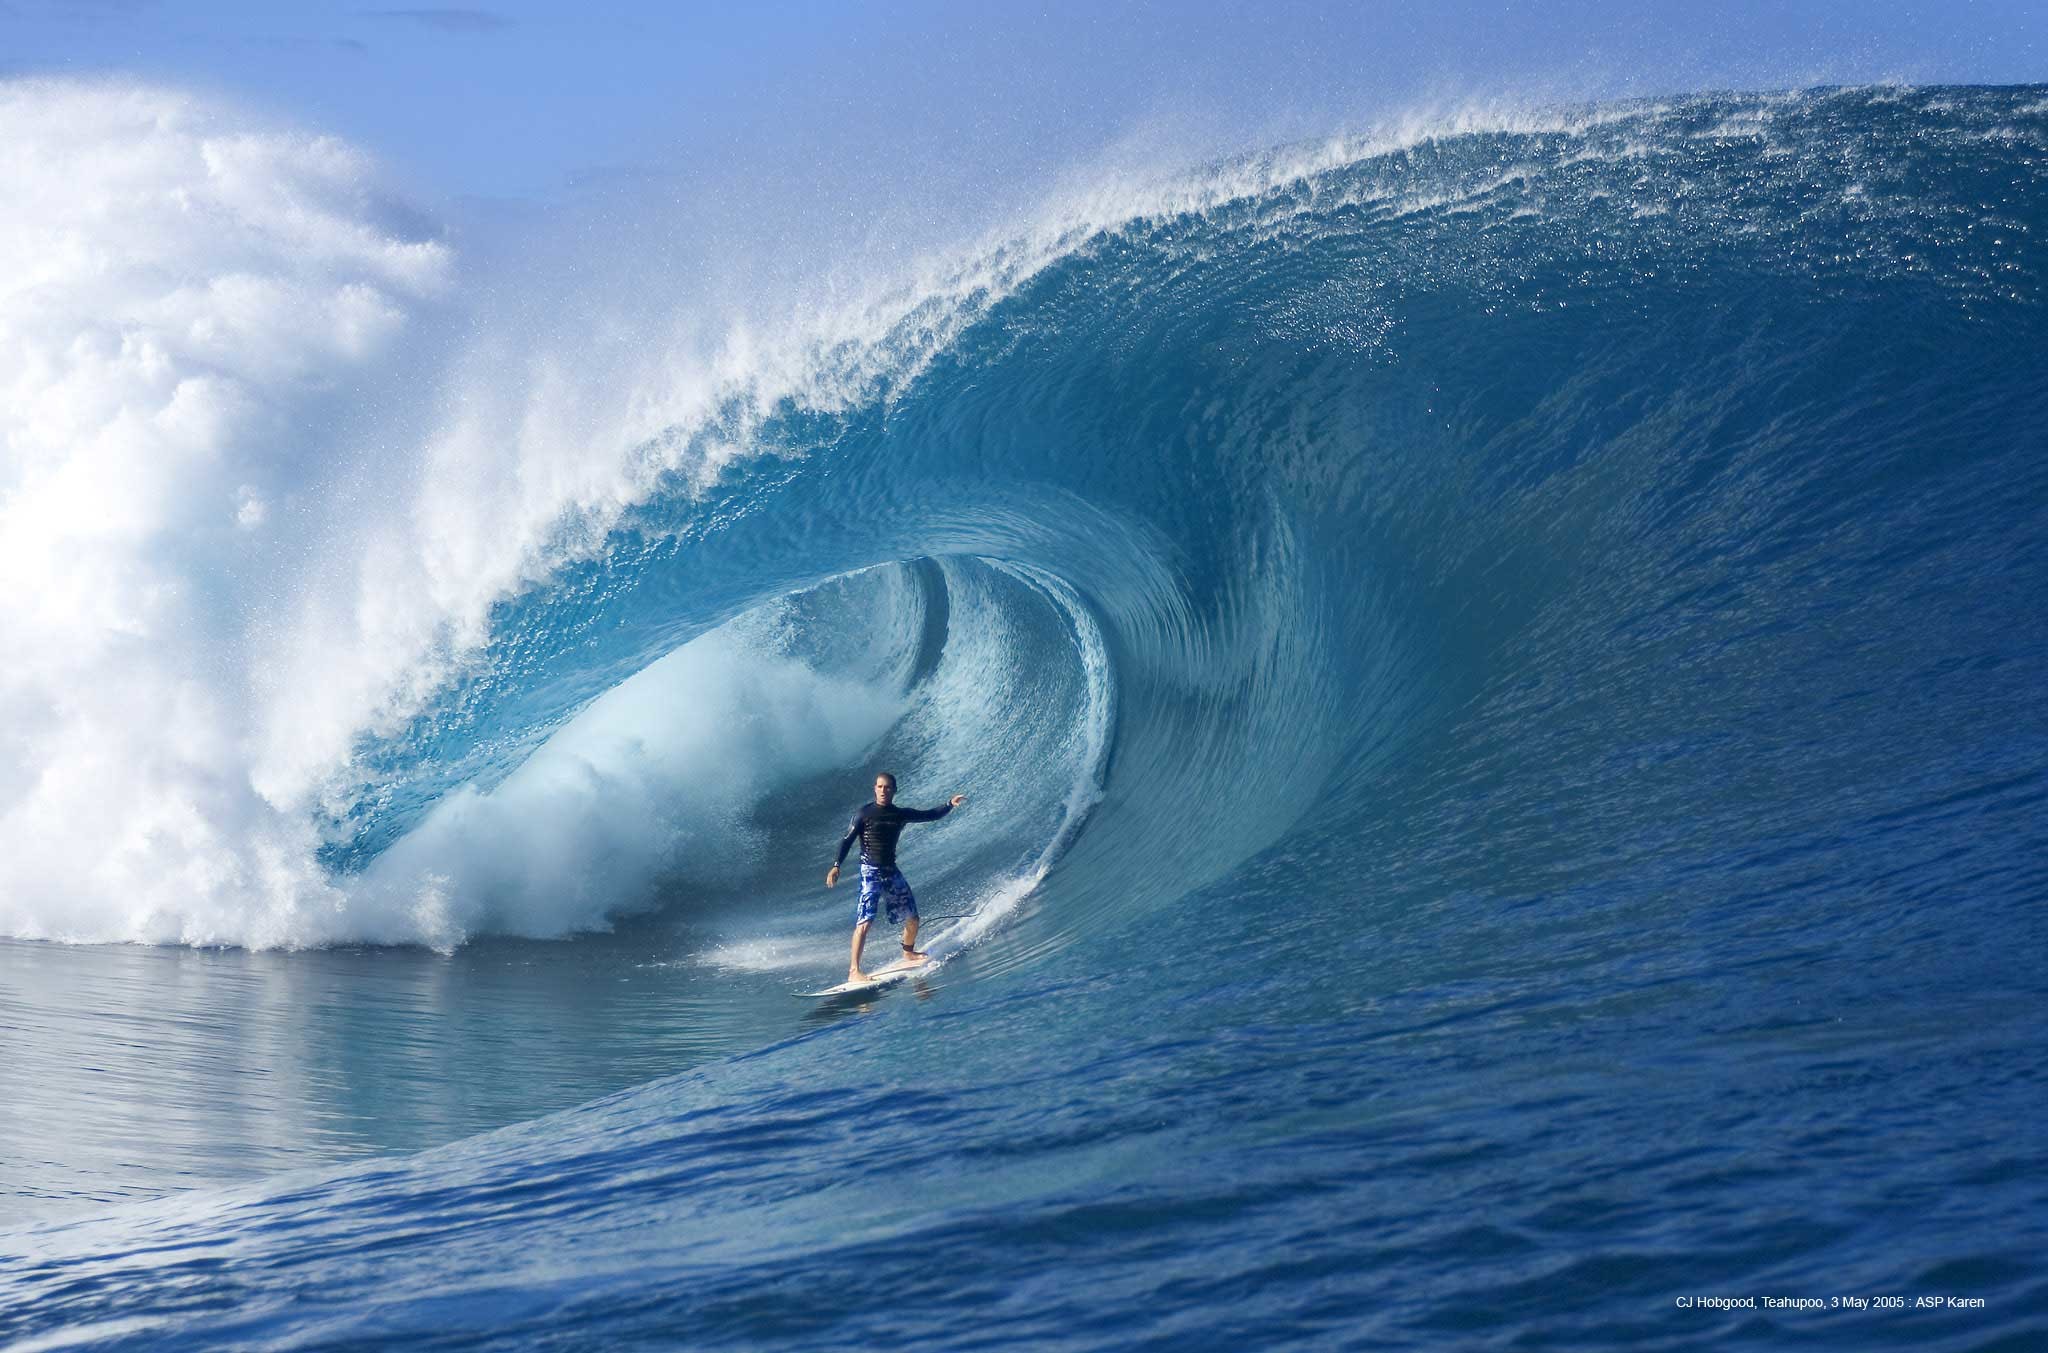 2048x1353 surfersvillage.com - CJ Hobgood catches a giant paddle-in wave at Teahupoo  - Surfing News, Surfing Contest, All the surf in one website